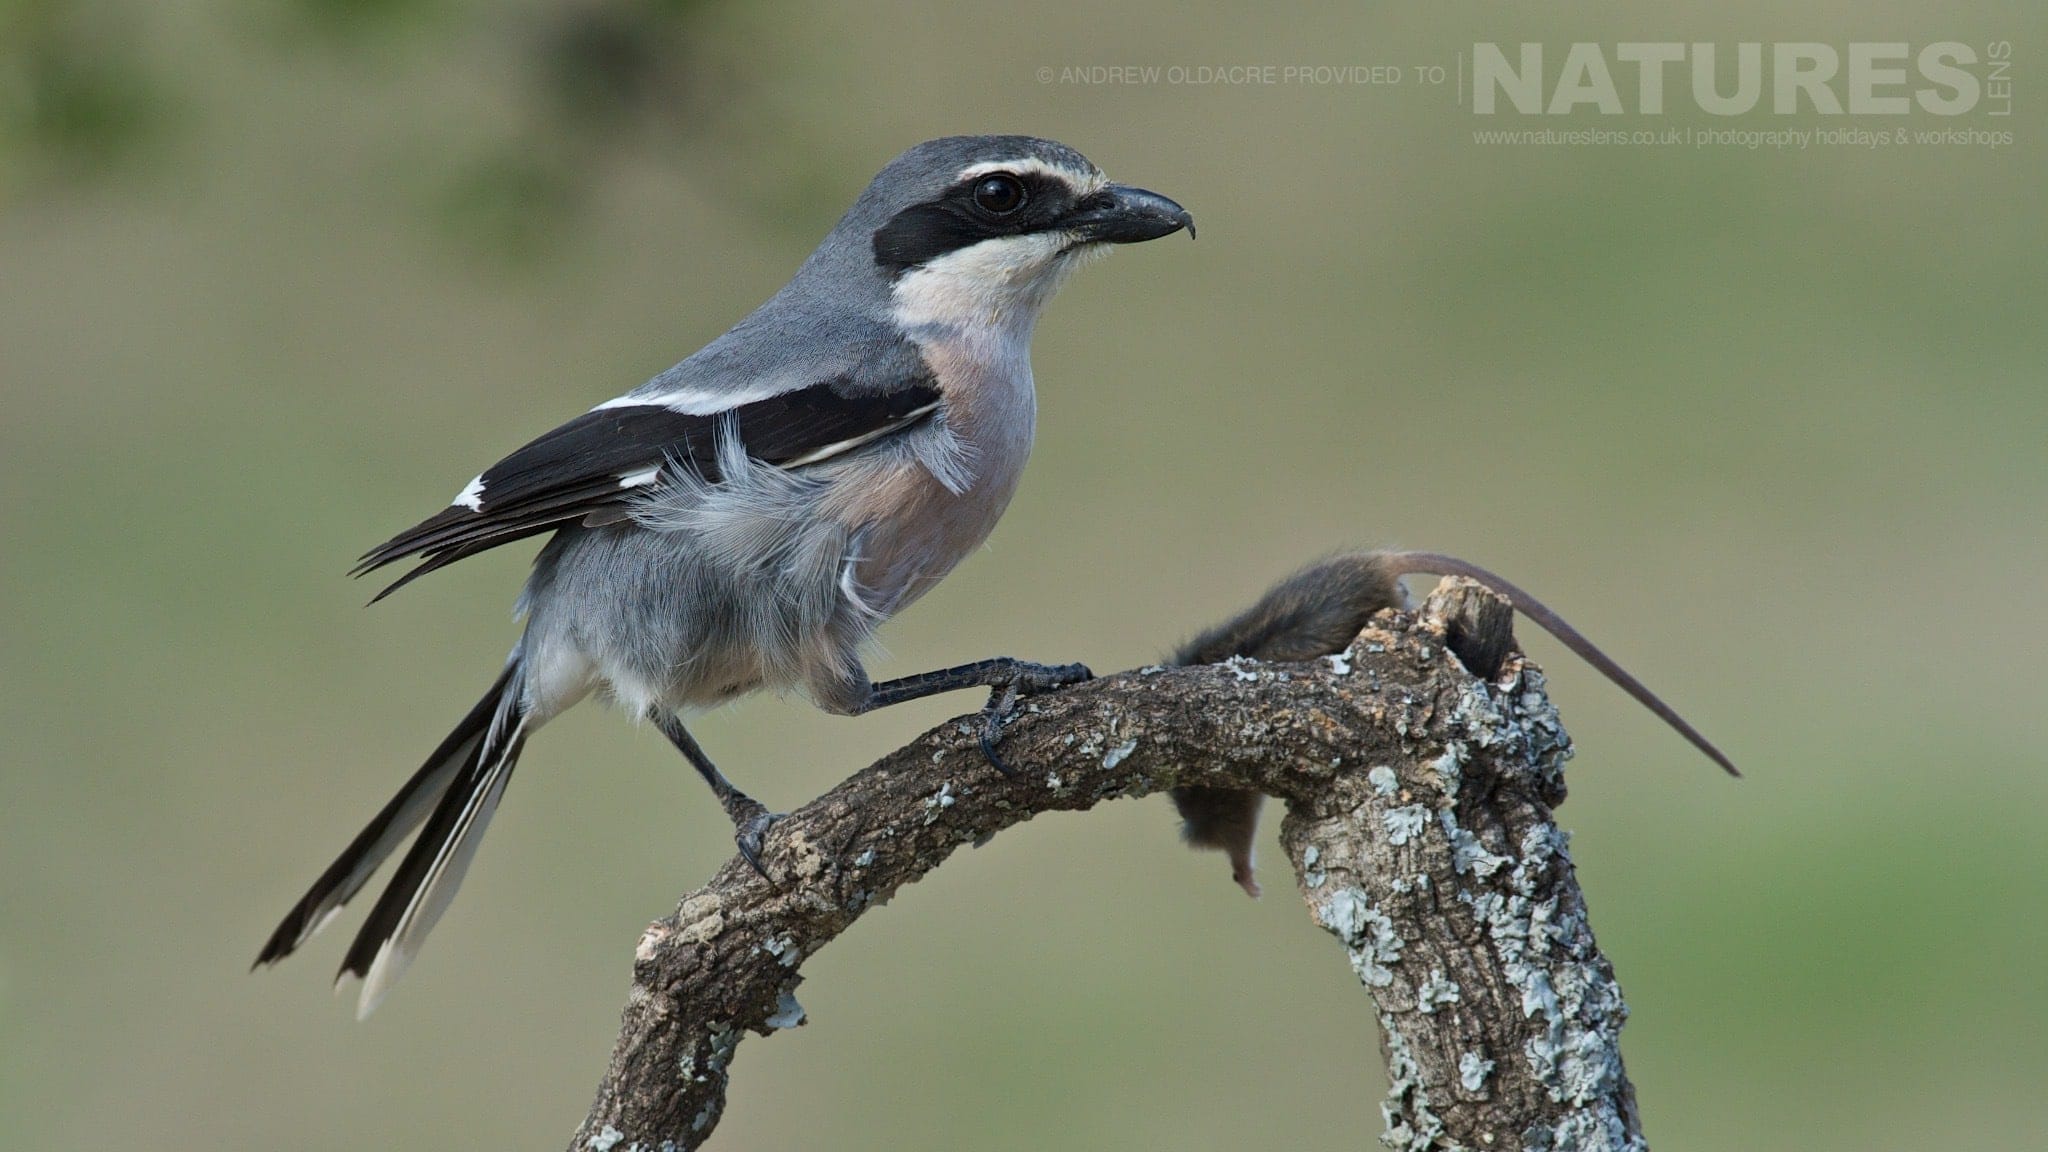 One Of The Southern Grey Shrikes Found On The Spanish Plains - Photographed On The Natureslens Birds Of Calera Photography Holiday